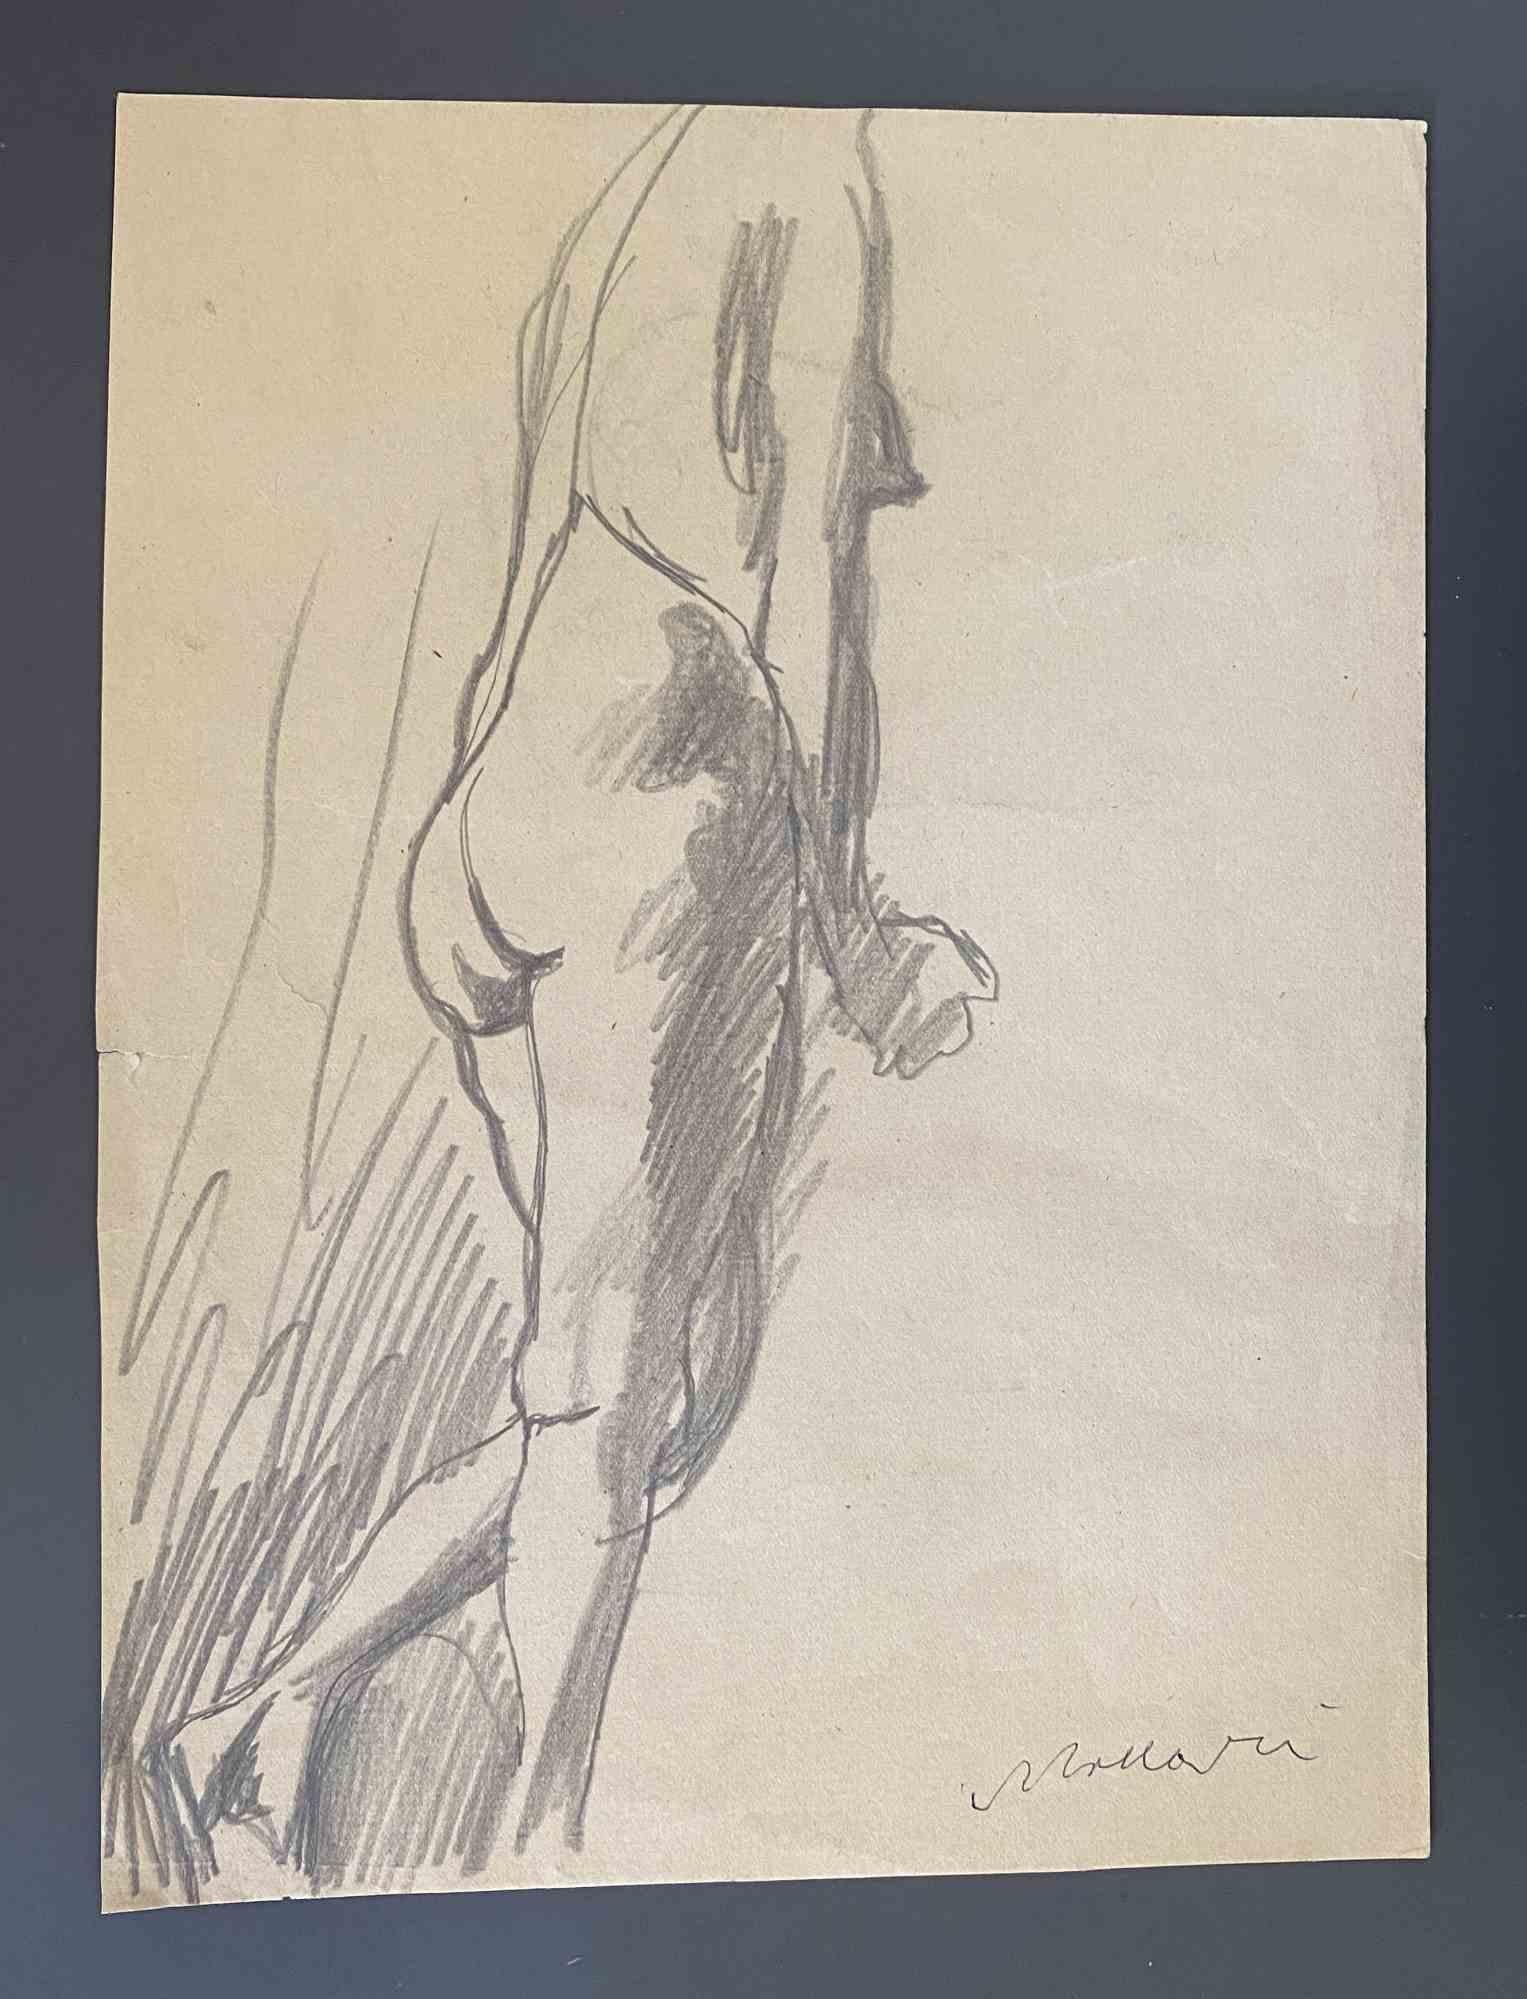 Nude is a pencil Drawing realized by Mino Maccari  (1924-1989) in the Mid-20th Century.

Hand-signed on the lower.

Good conditions.

Mino Maccari (Siena, 1924-Rome, June 16, 1989) was an Italian writer, painter, engraver and journalist, winner of